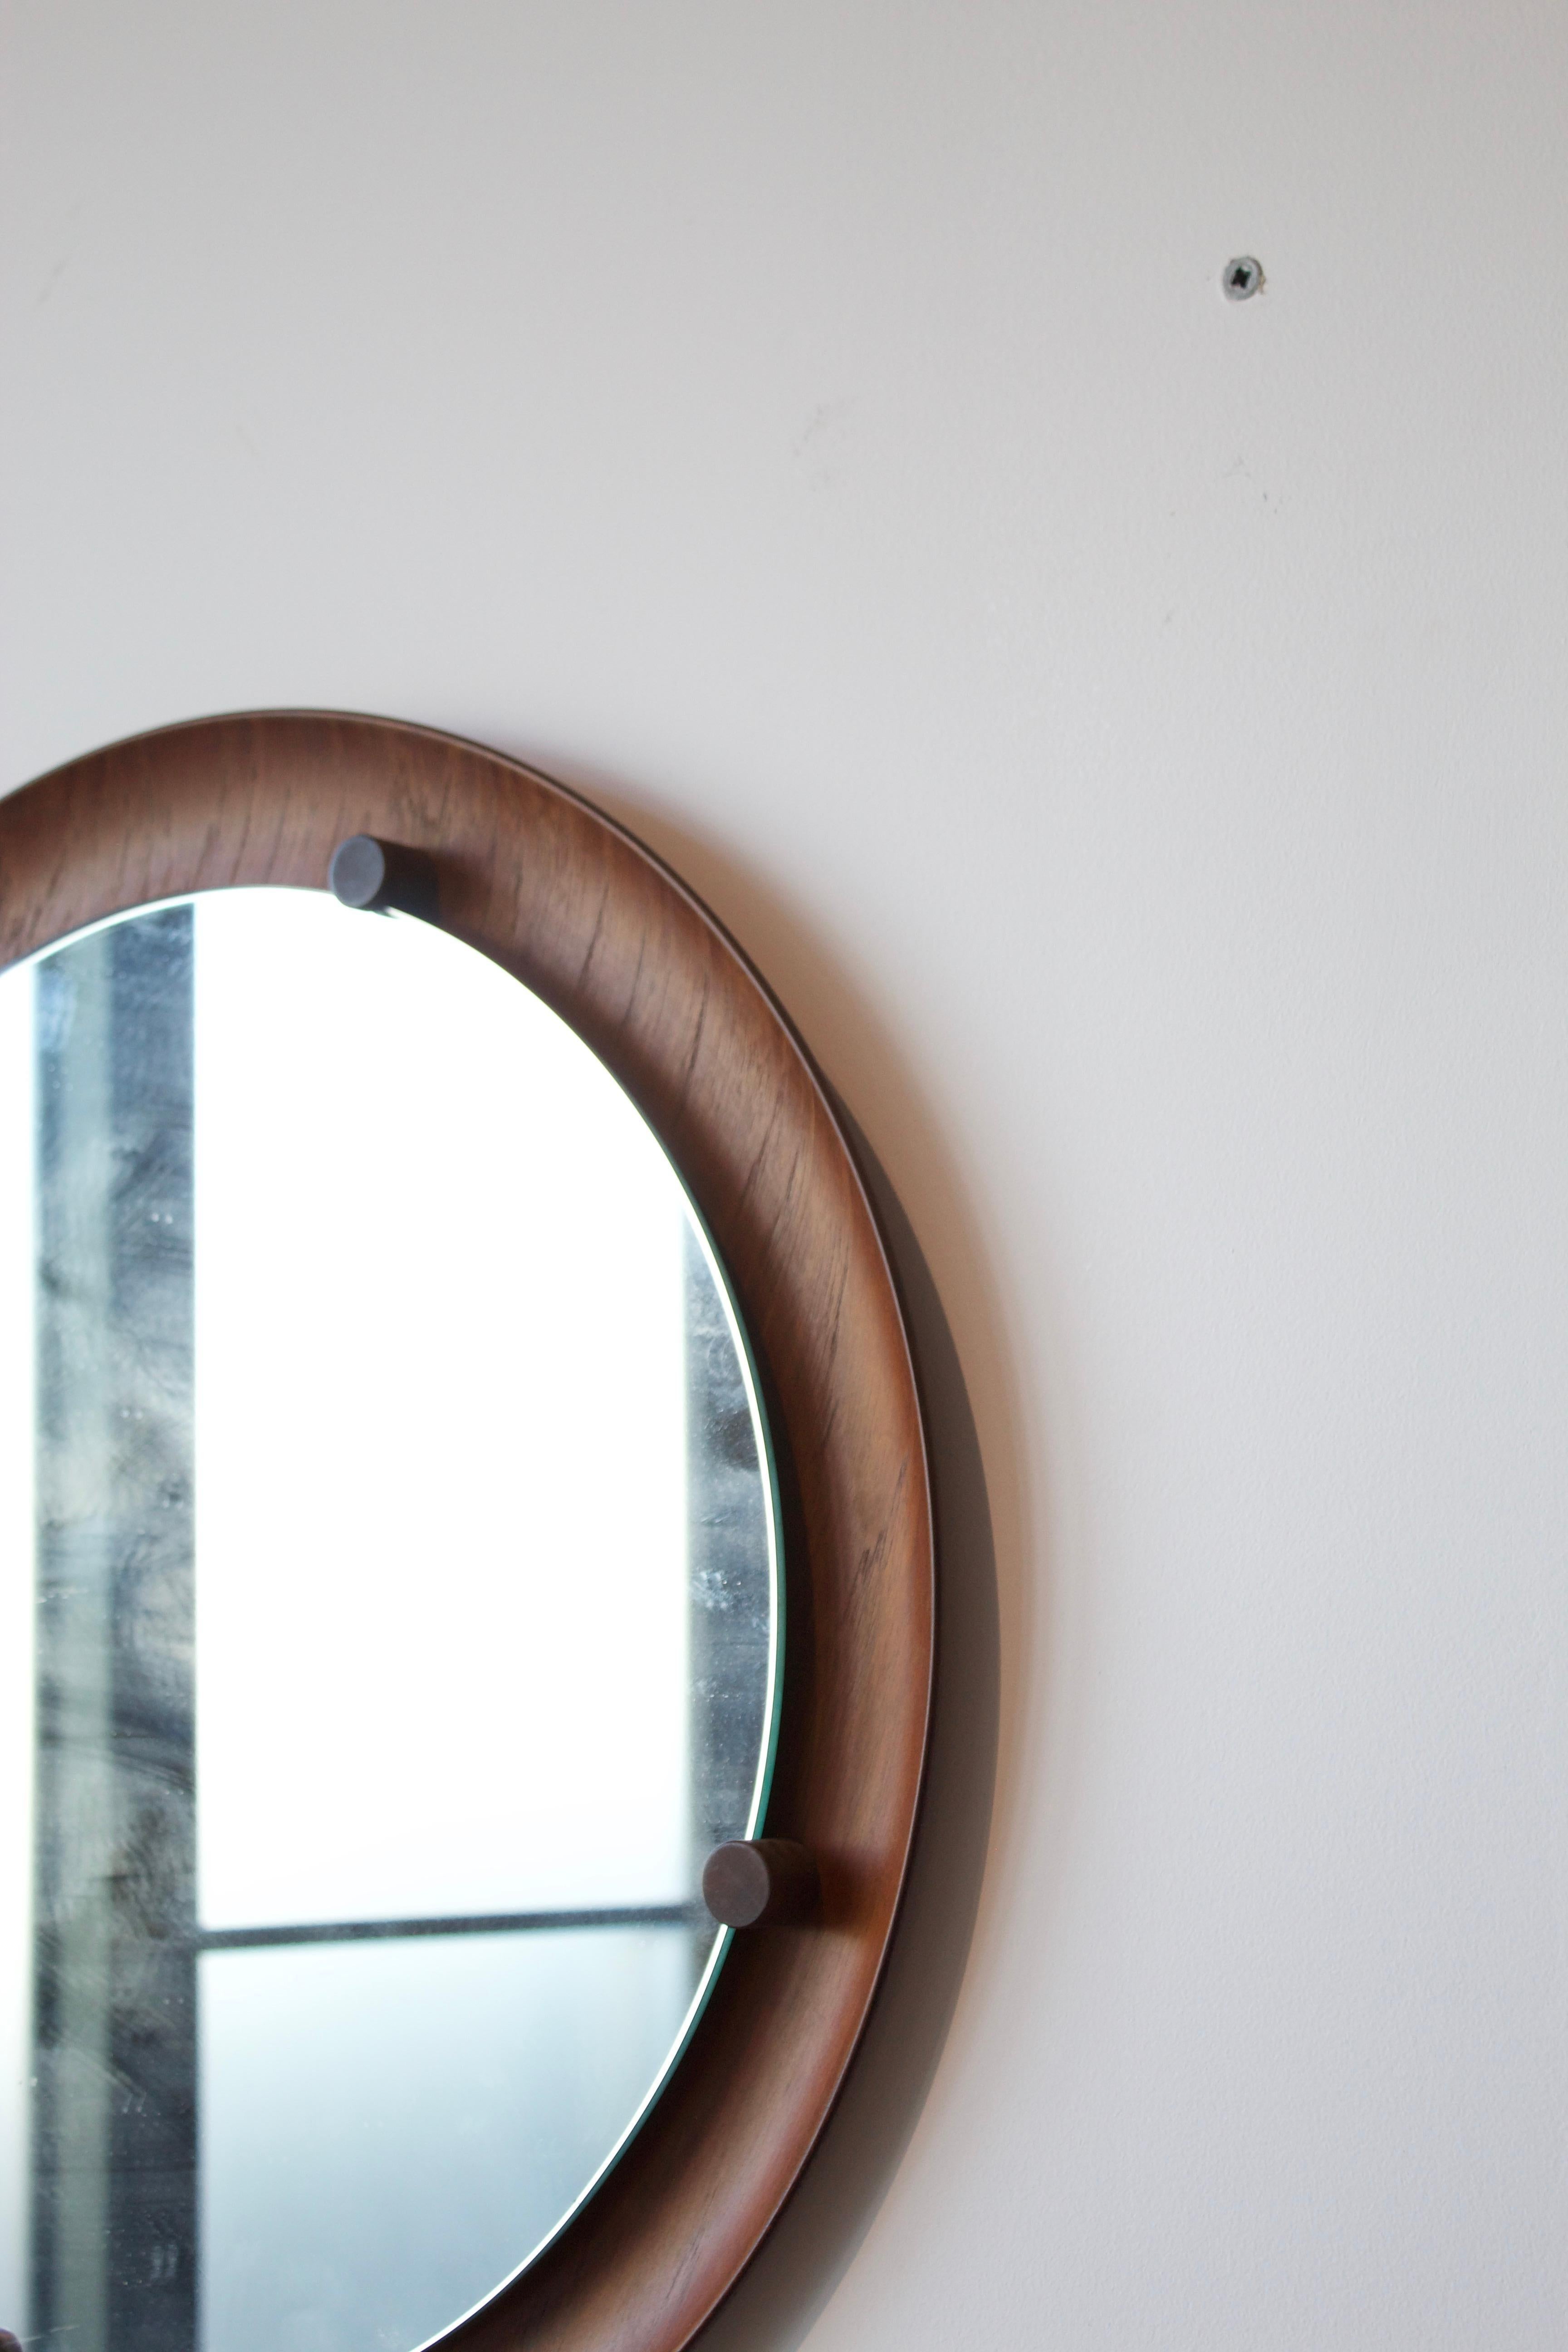 A wall mirror, design attributed to Franco Campo and Carlo Graffi, presumably manufactured by Home, Italy, 1950s-1960s.

In teak plywood and original cristal glass.